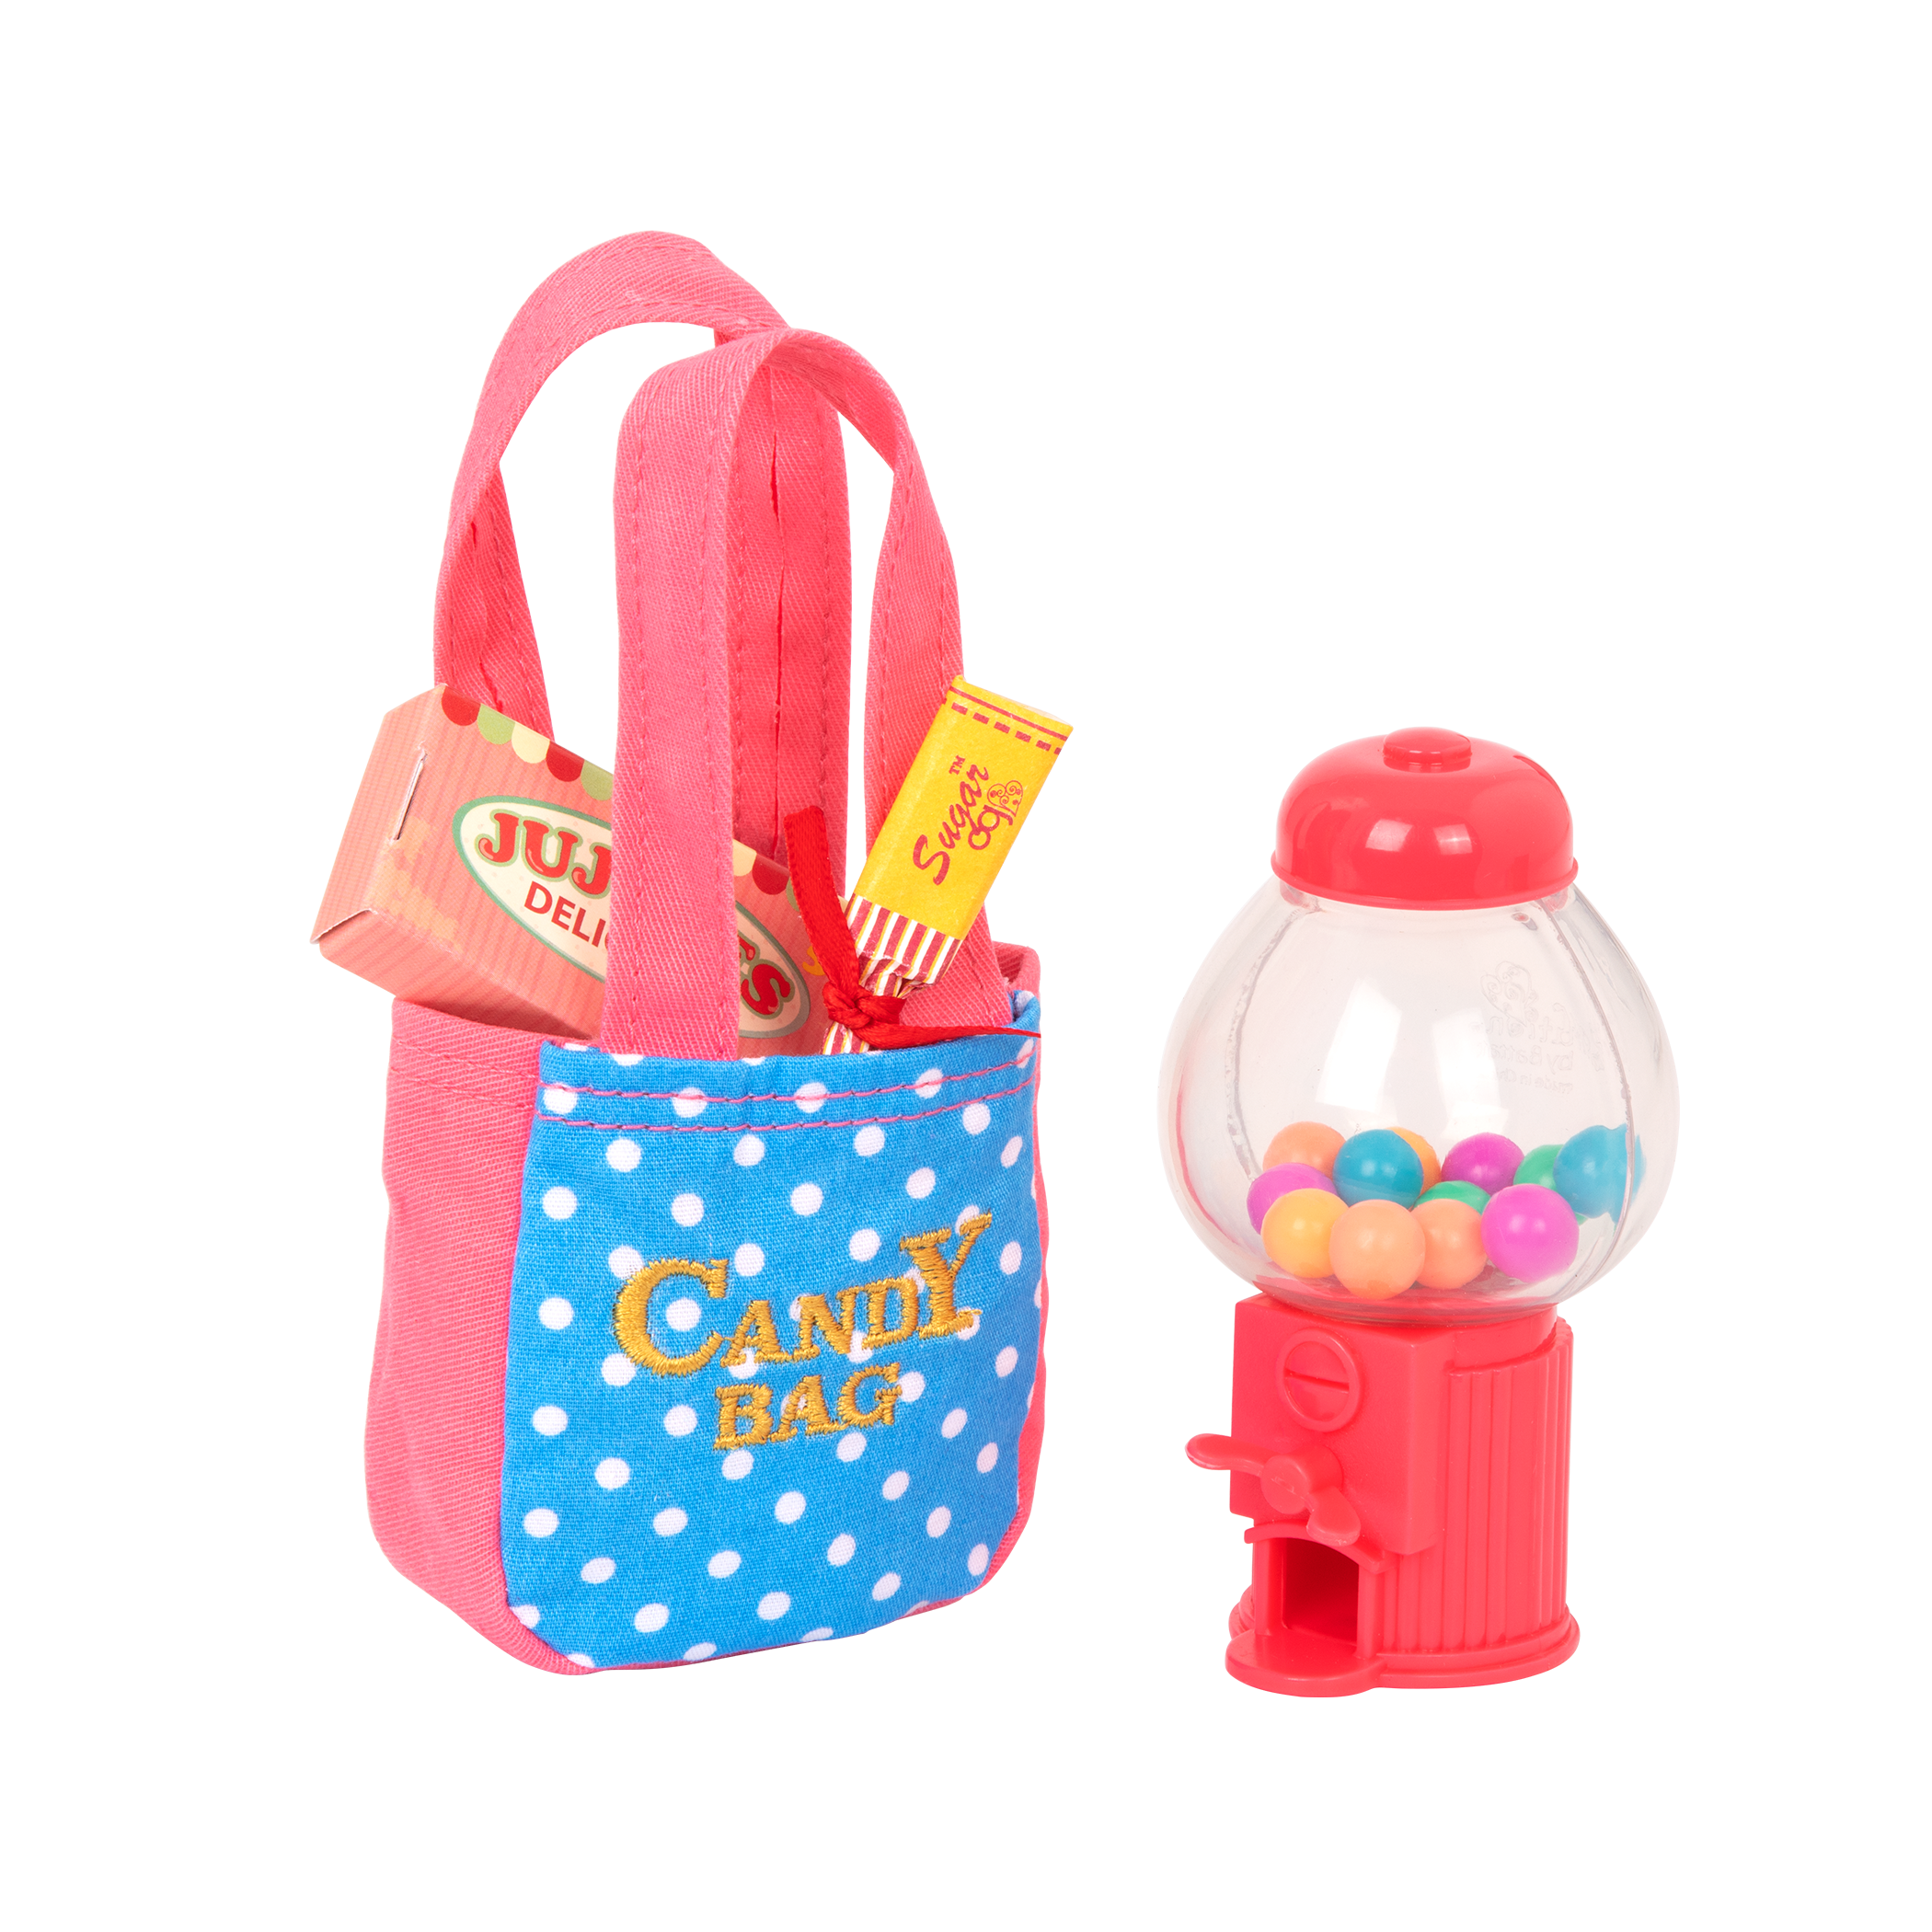 Treats and Sweets Gumball Machine for 18-inch Dolls